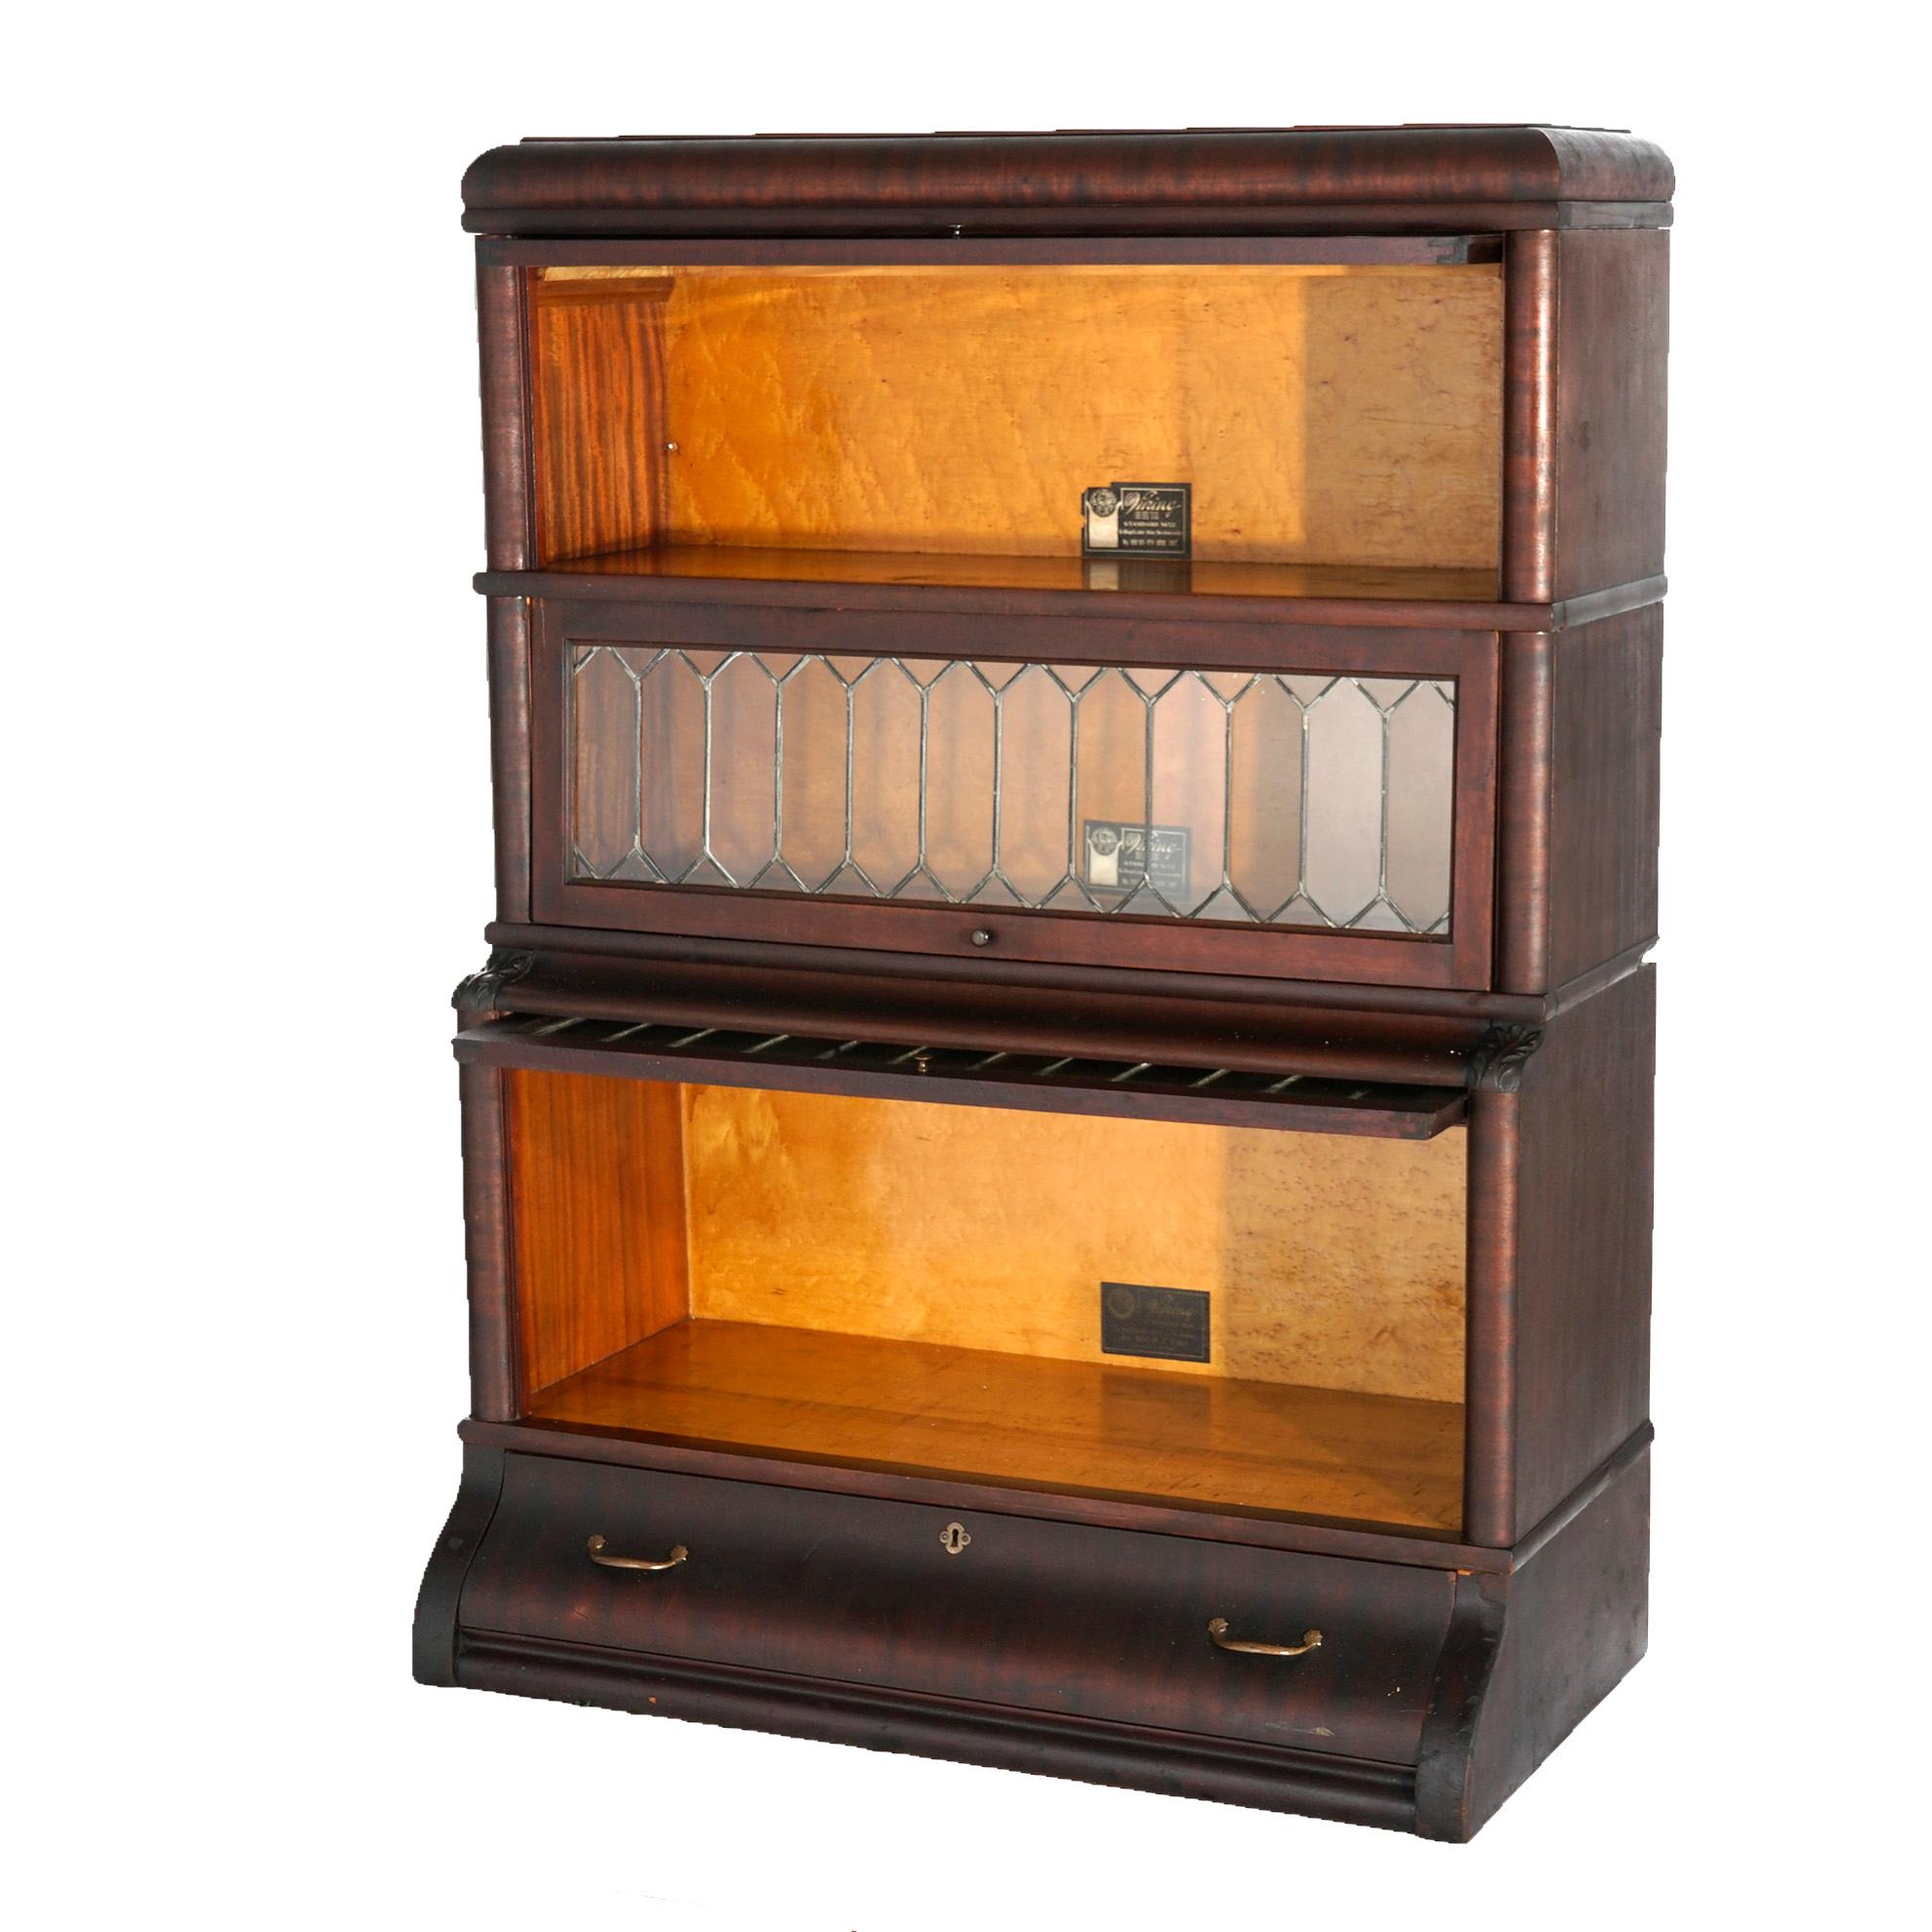 An antique Arts and Crafts barrister bookcase by Viking offers mahogany construction with three stacks, each having leaded glass pull-out doors, seated on ogee base with long drawer, maker label as photograph, c1910

Measures- overall 48.75''H x